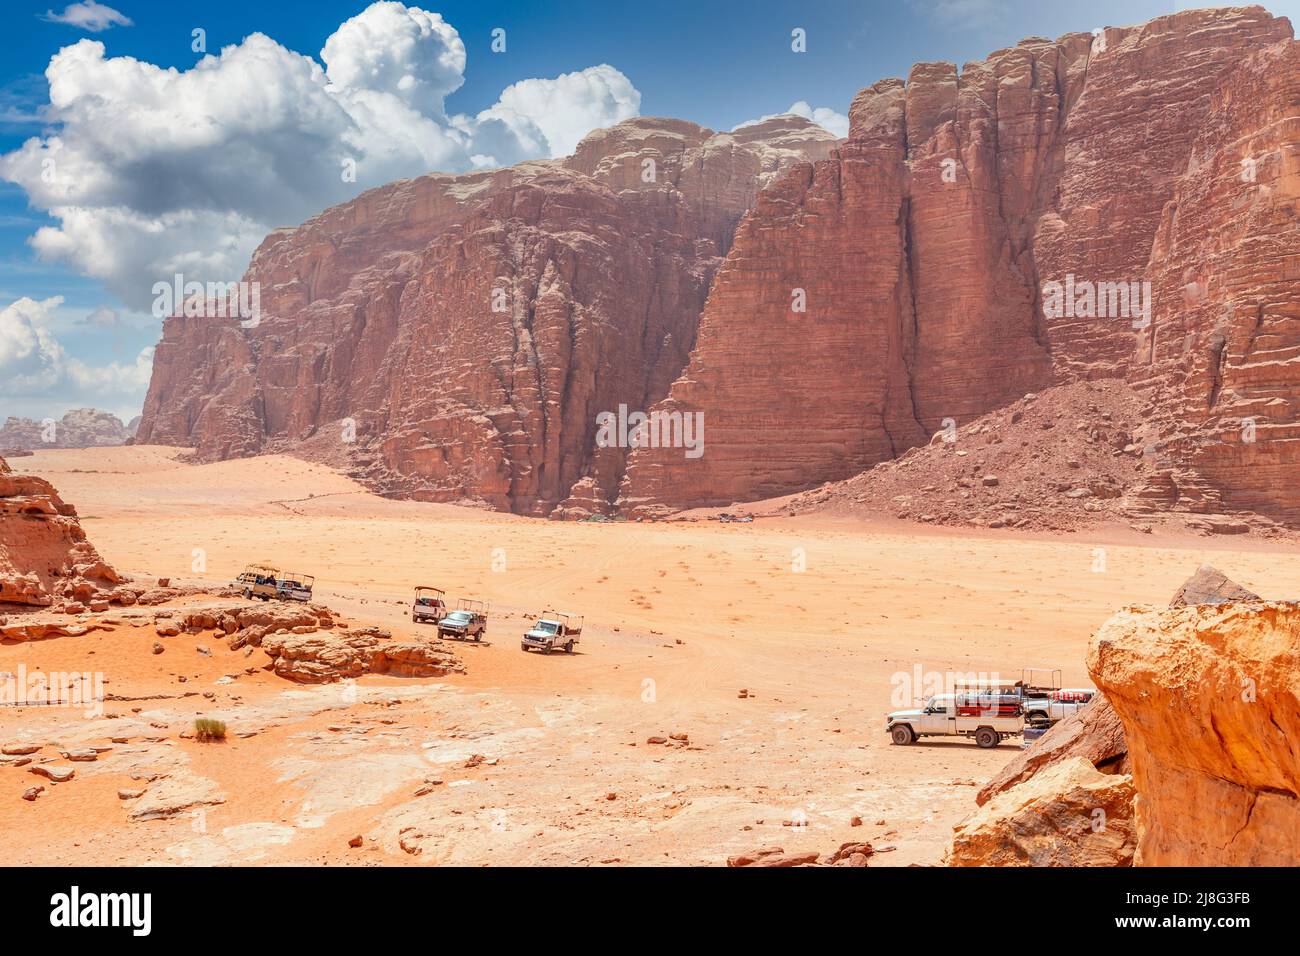 Orange sands and rocks of Wadi Rum desert with bedouin cars in the foreground, Jordan Stock Photo